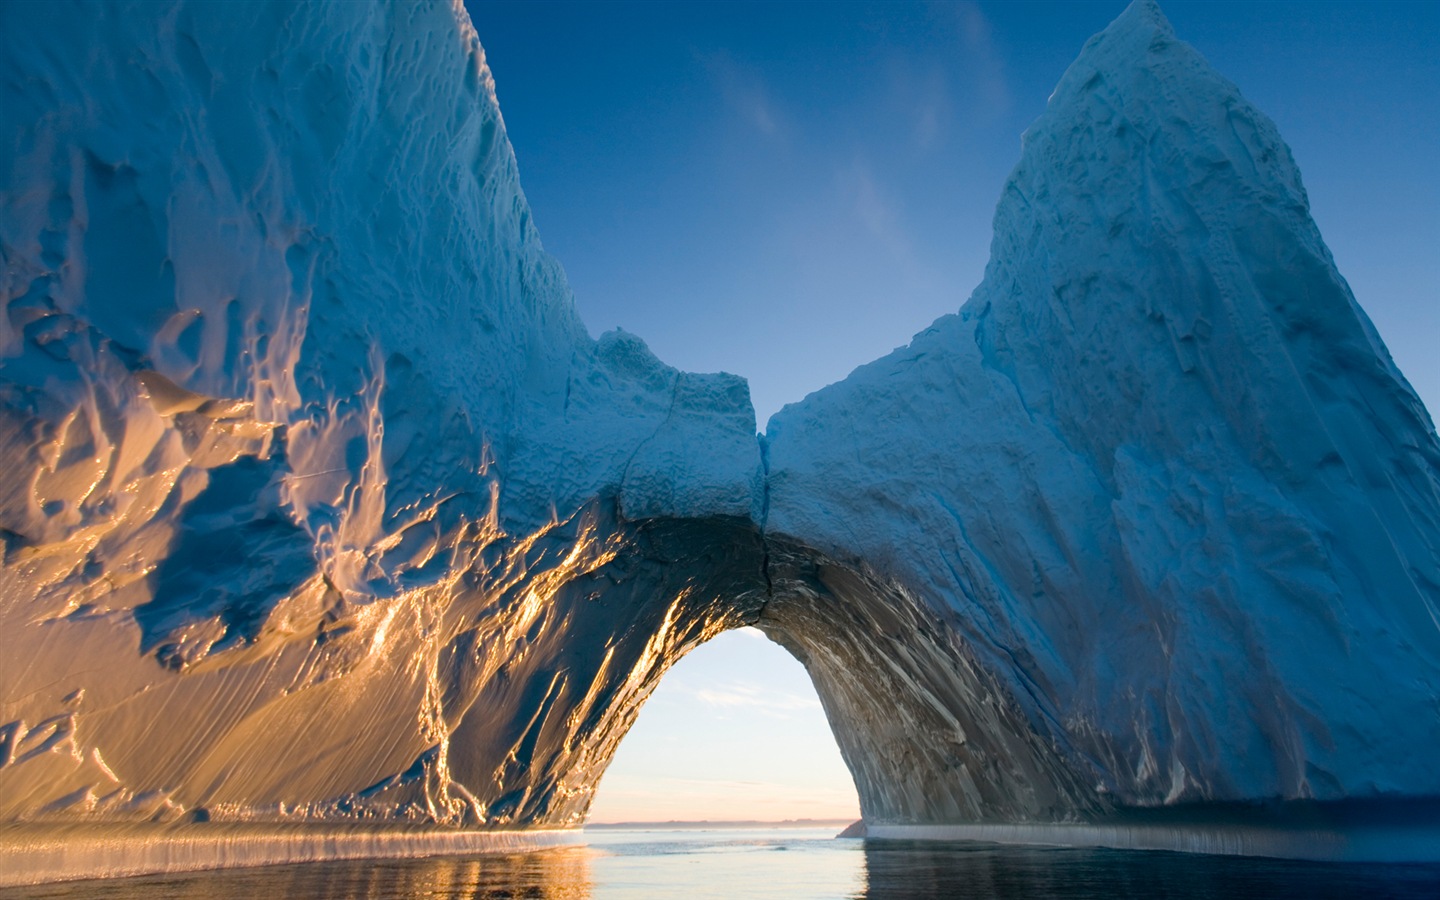 Windows 8 Wallpapers: Arctic, the nature ecological landscape, arctic animals #3 - 1440x900